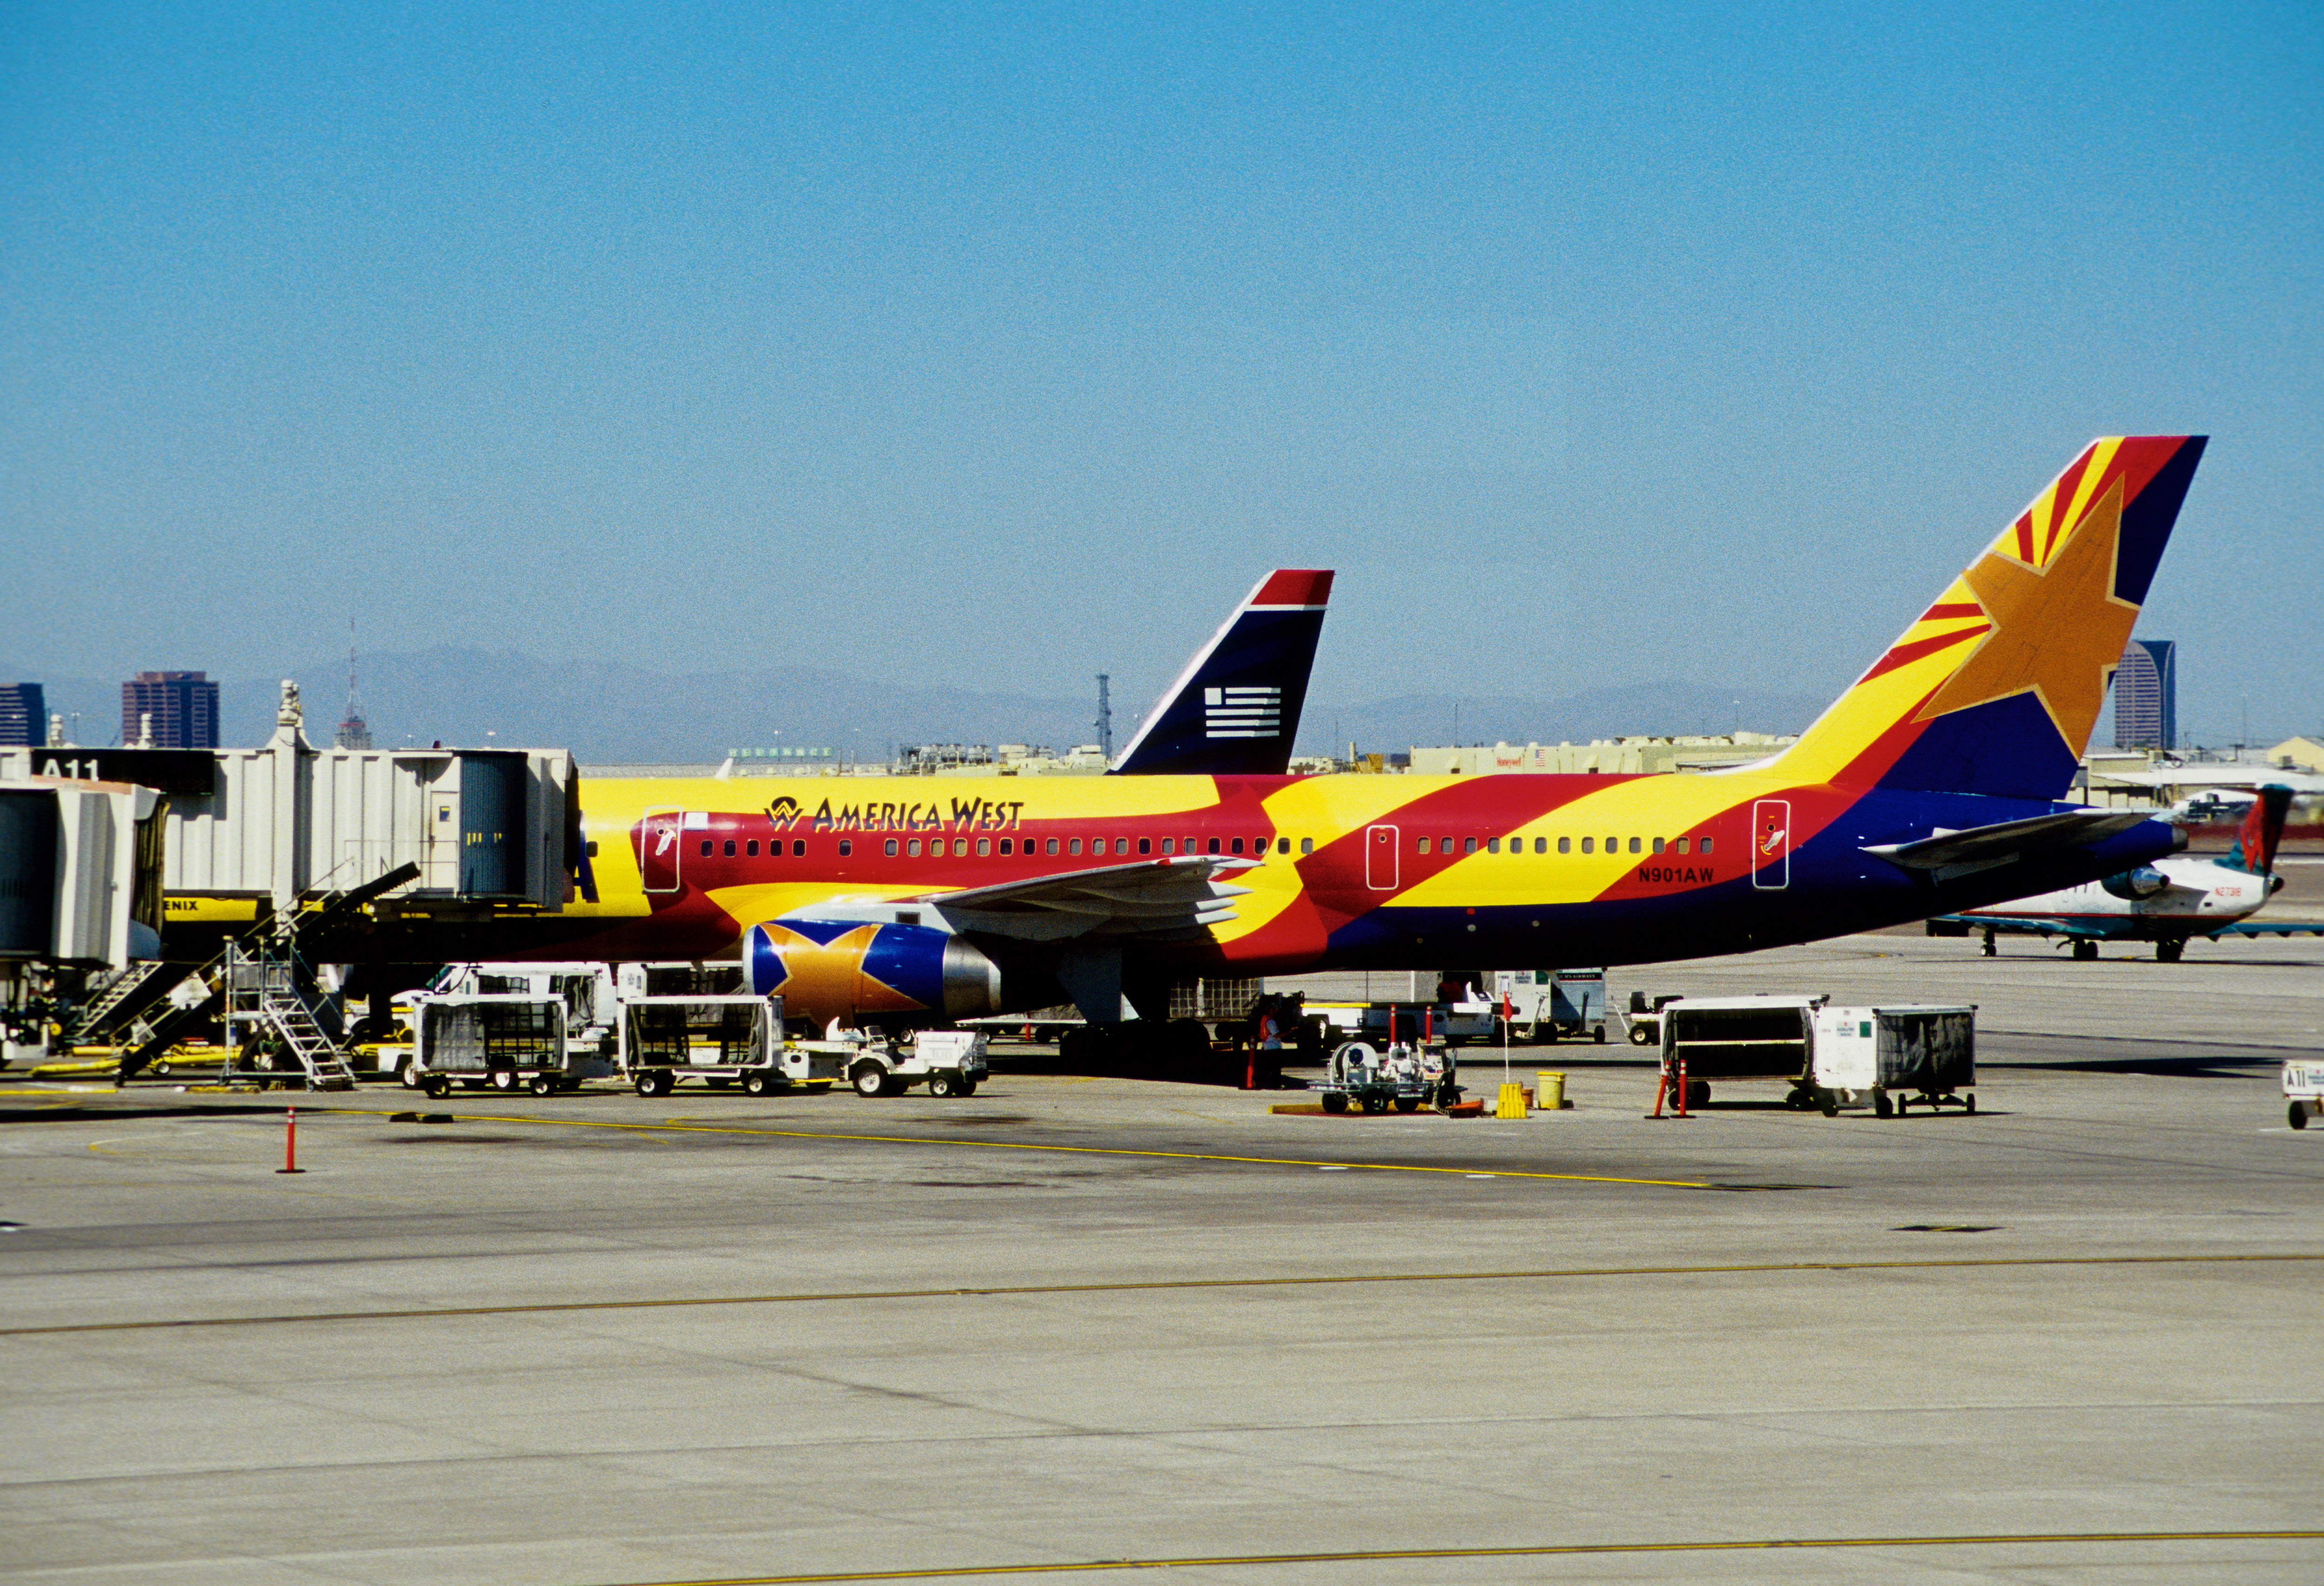 422aa - America West Airlines Boeing 757-2S7, N901AW@PHX,25.09.2006 - Flickr - Aero Icarus